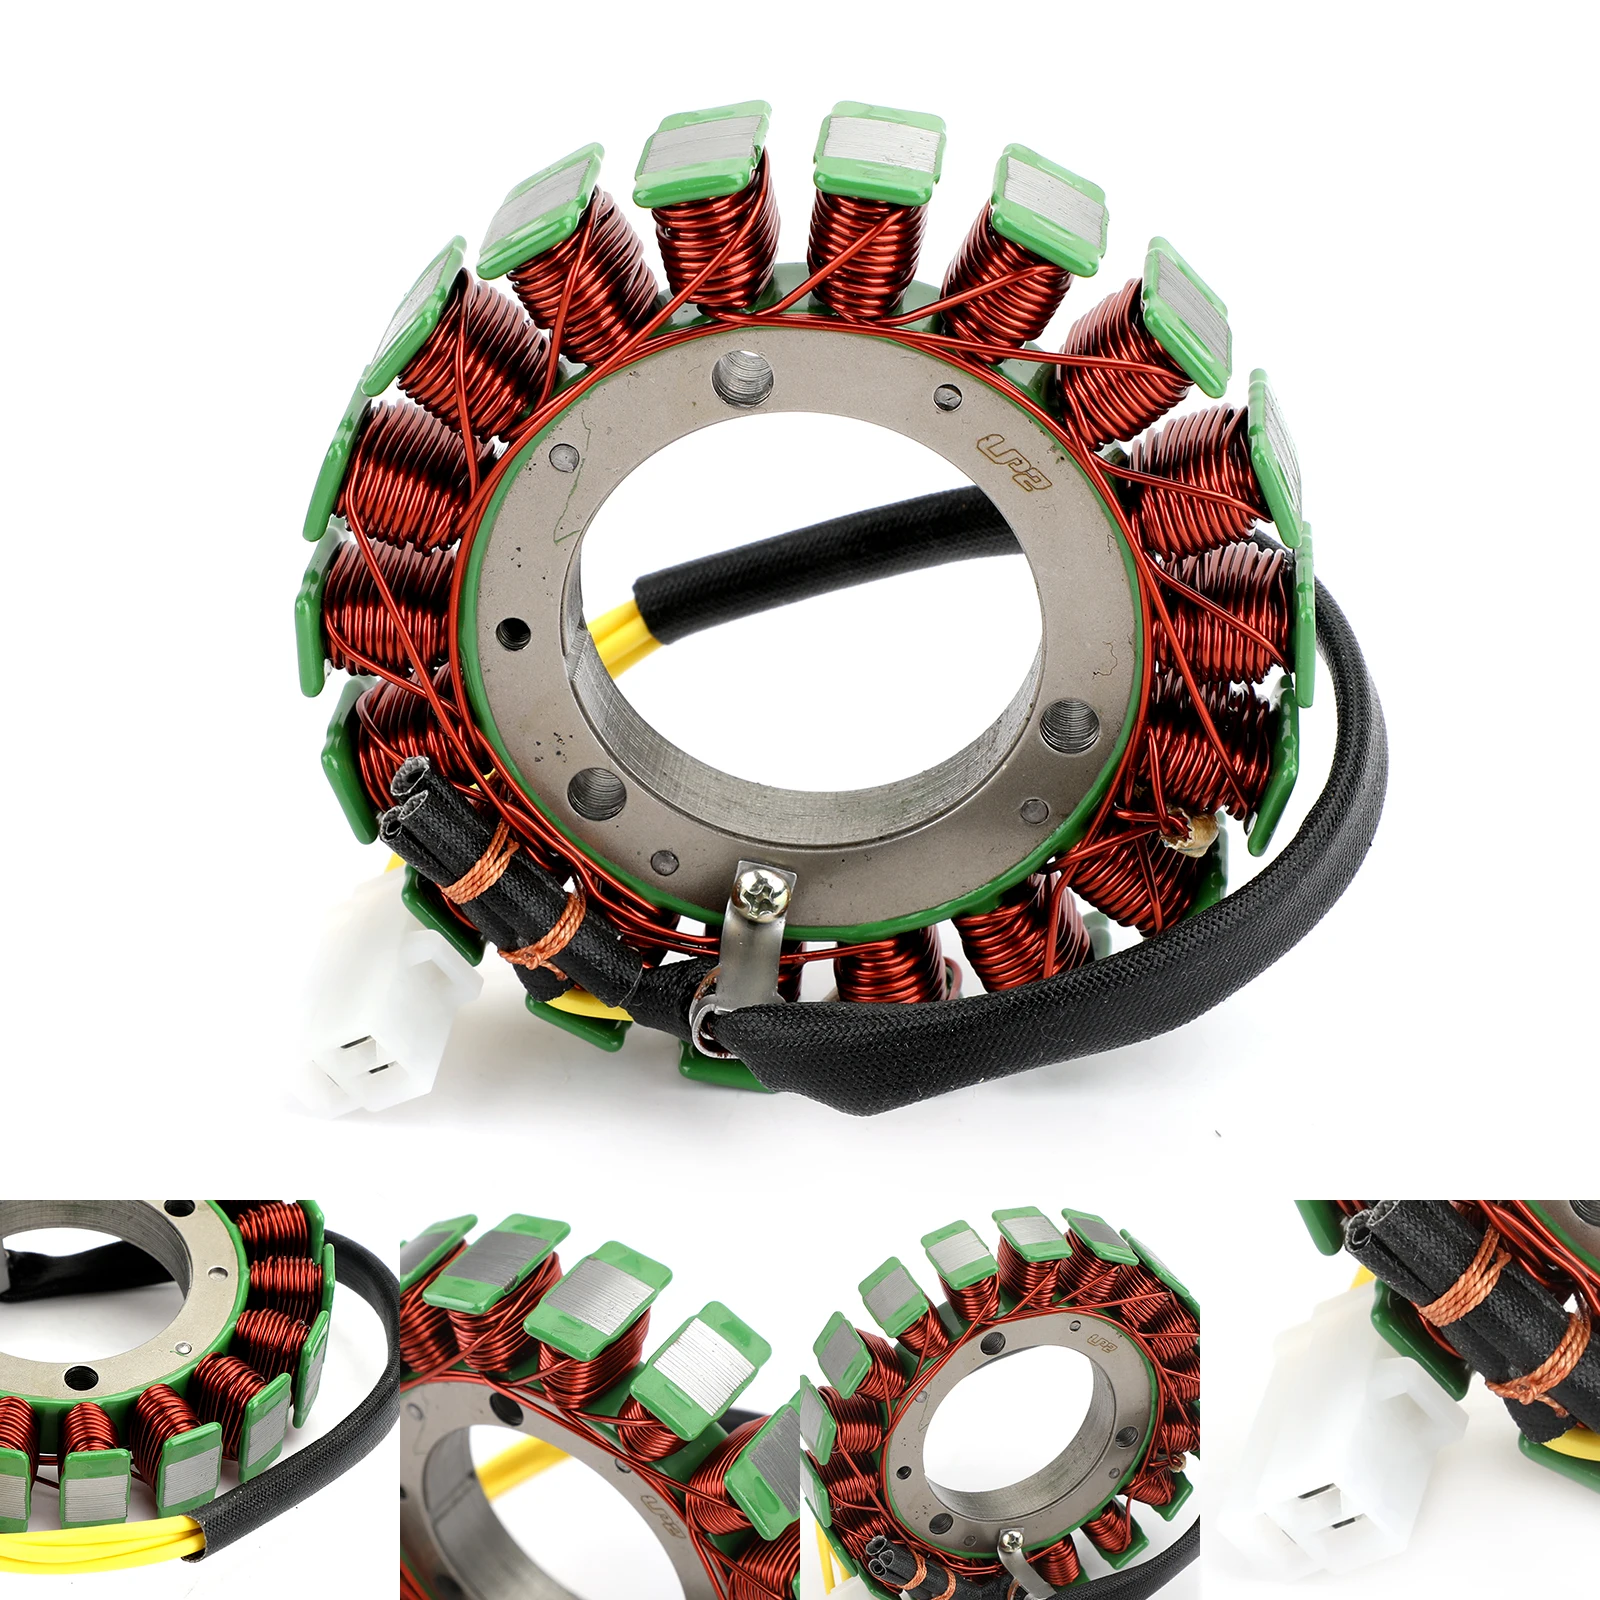 

Topteng Magneto Stator Coil For Arctic Cat EXT 580 / Pantera 580 EFI L/C 97-98 3005-053 motorcycle accessories